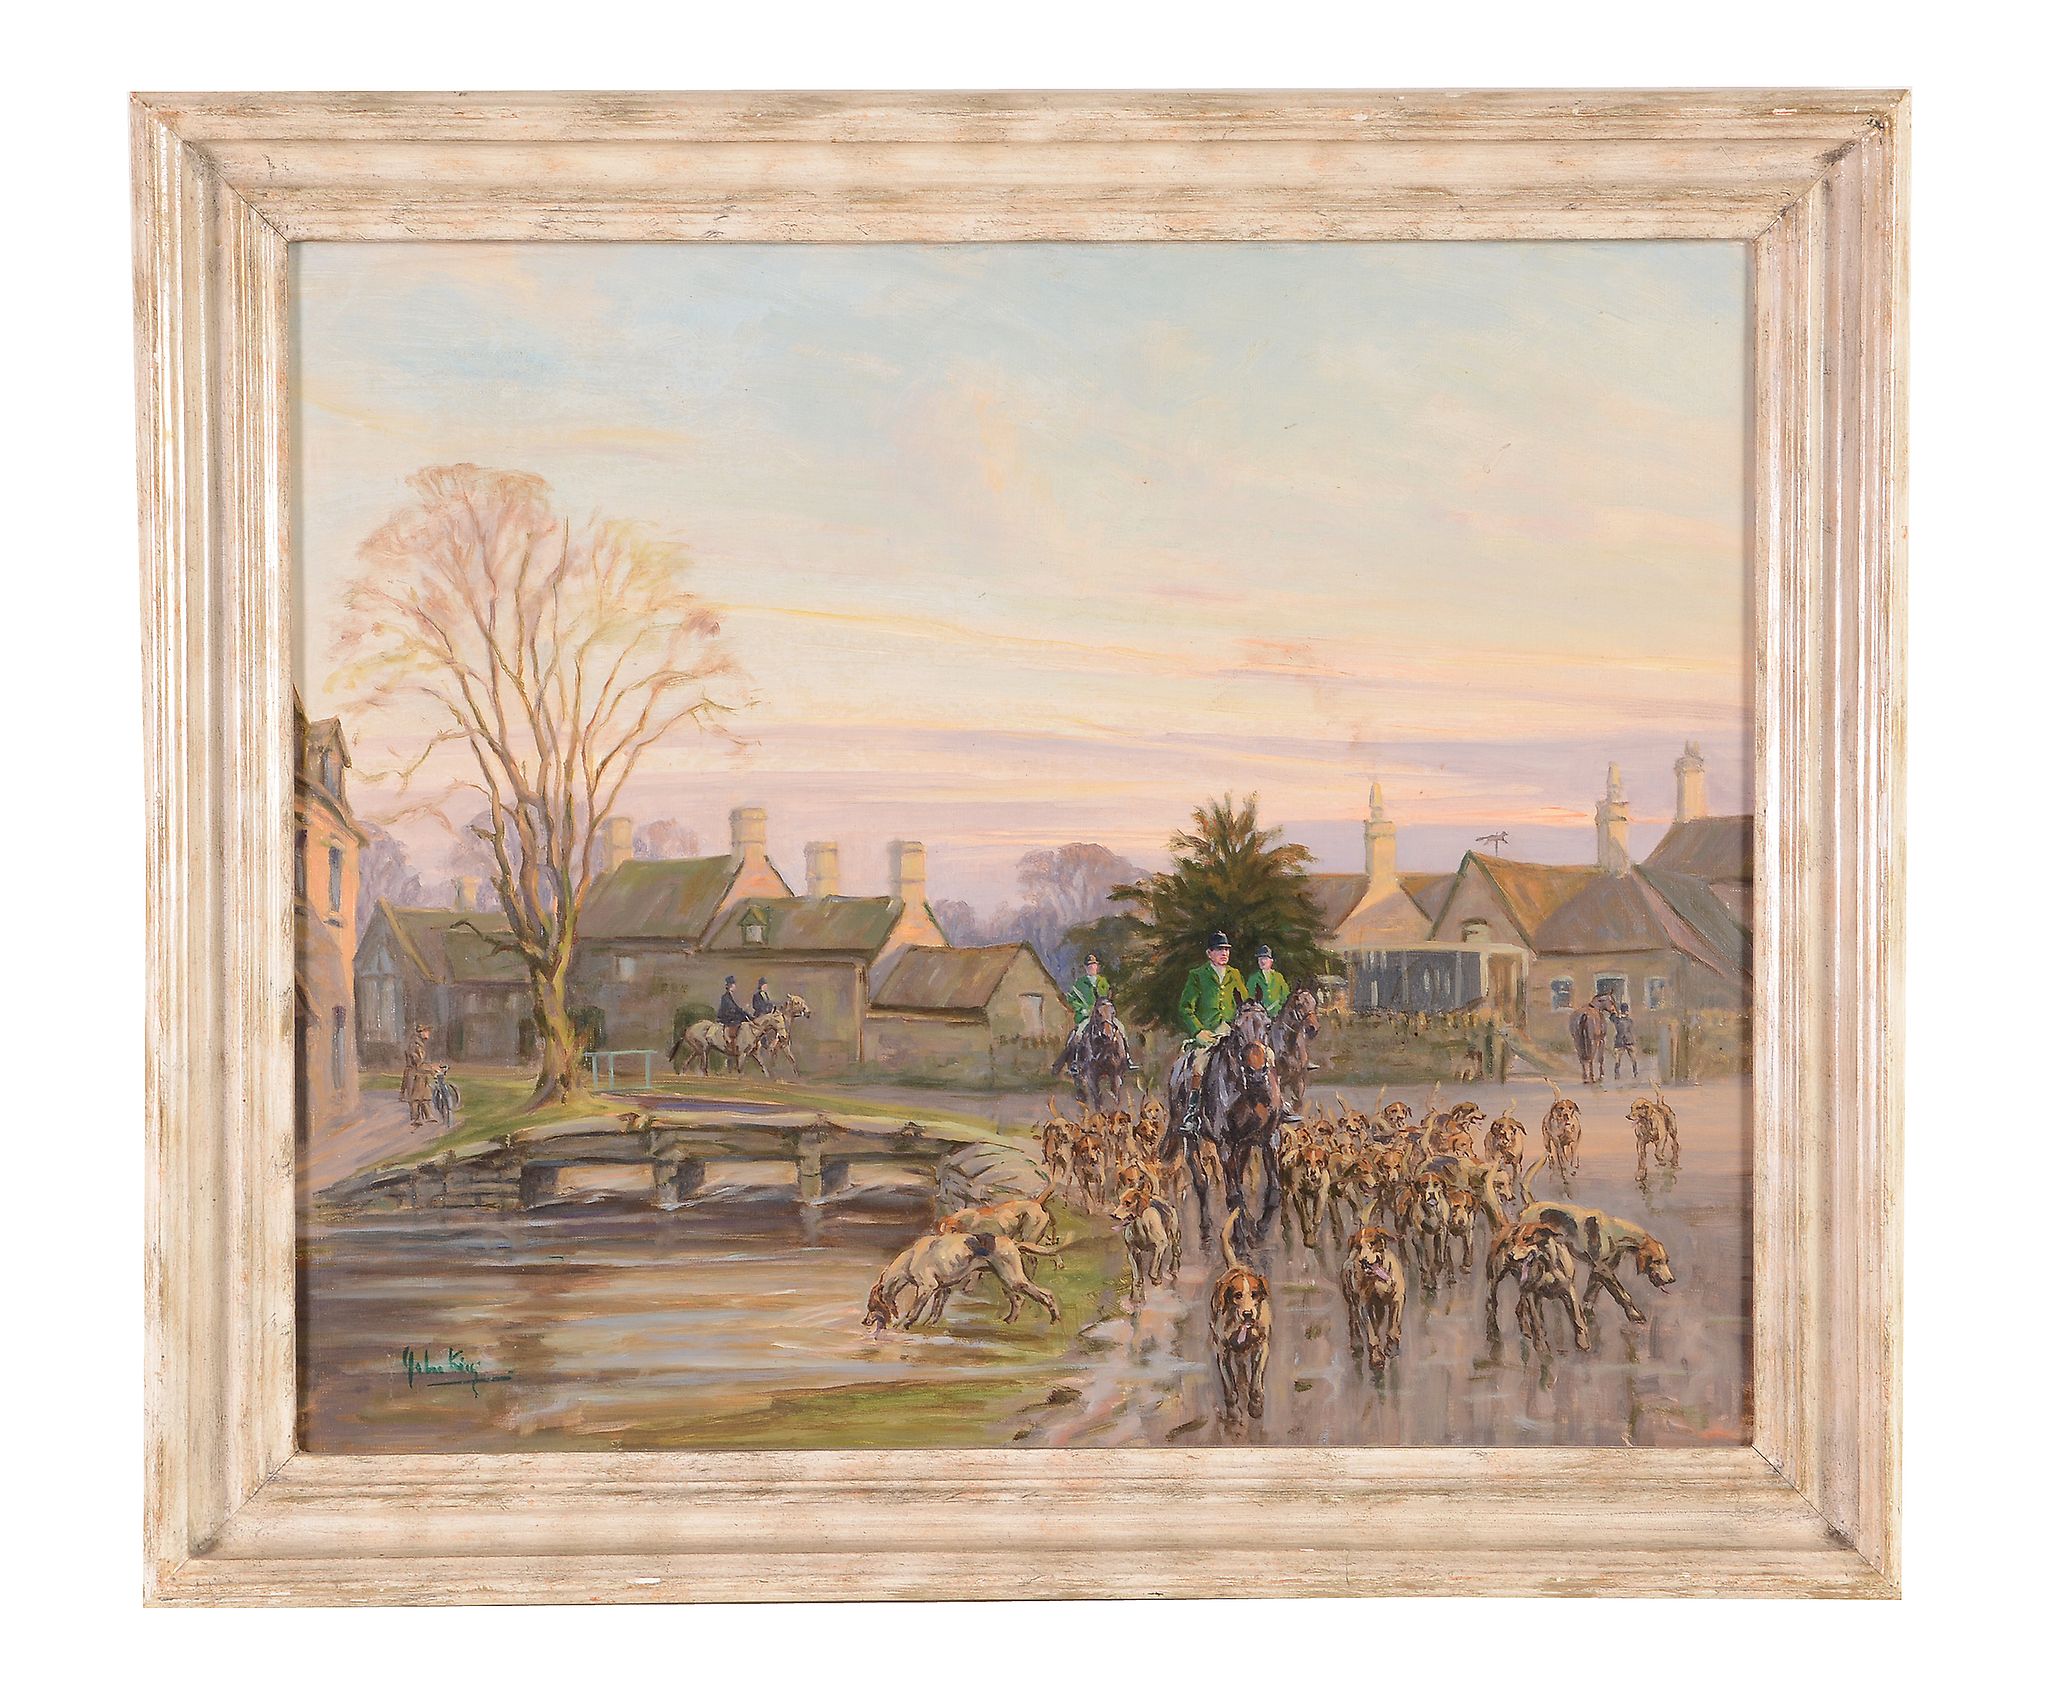 John Gregory King (1929-2014) - "Going home", Heythrop at Lower Slaughter Oil on canvas Signed lower - Image 2 of 2